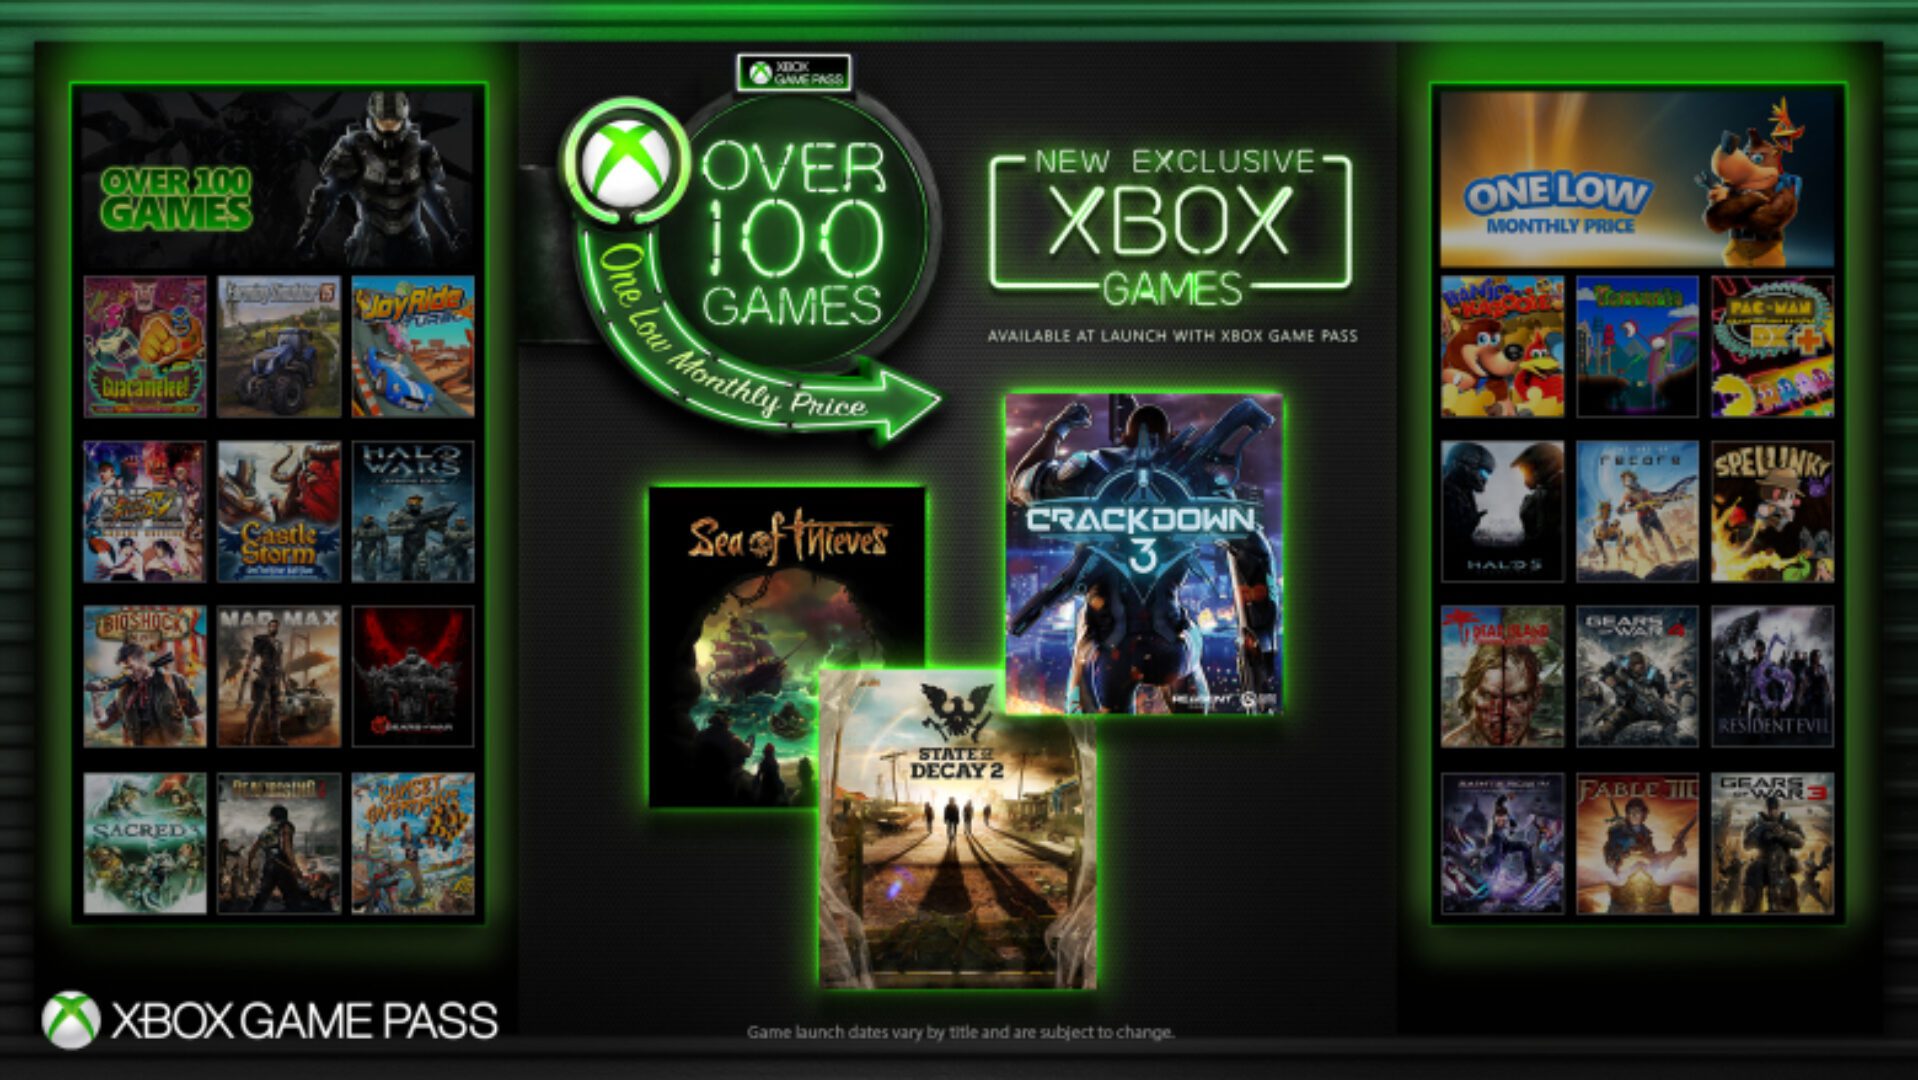 New Releases Coming to Xbox Game Pass